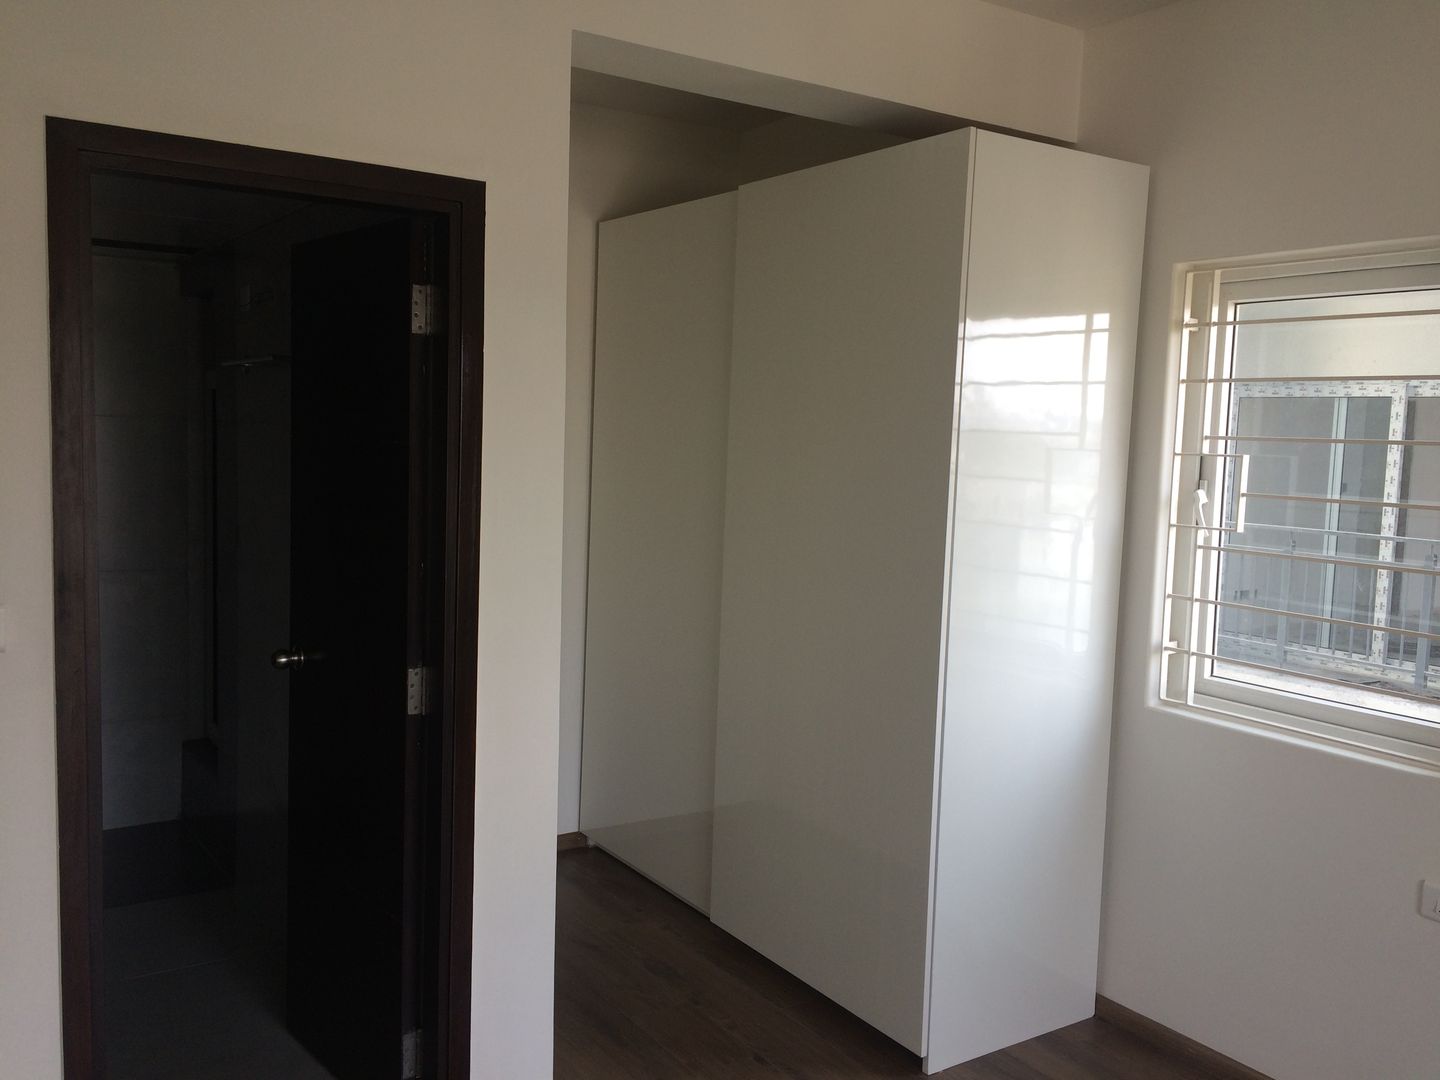 RBD Stillwaters Apartment, Design Space Design Space Bedroom پلائیووڈ Wardrobes & closets